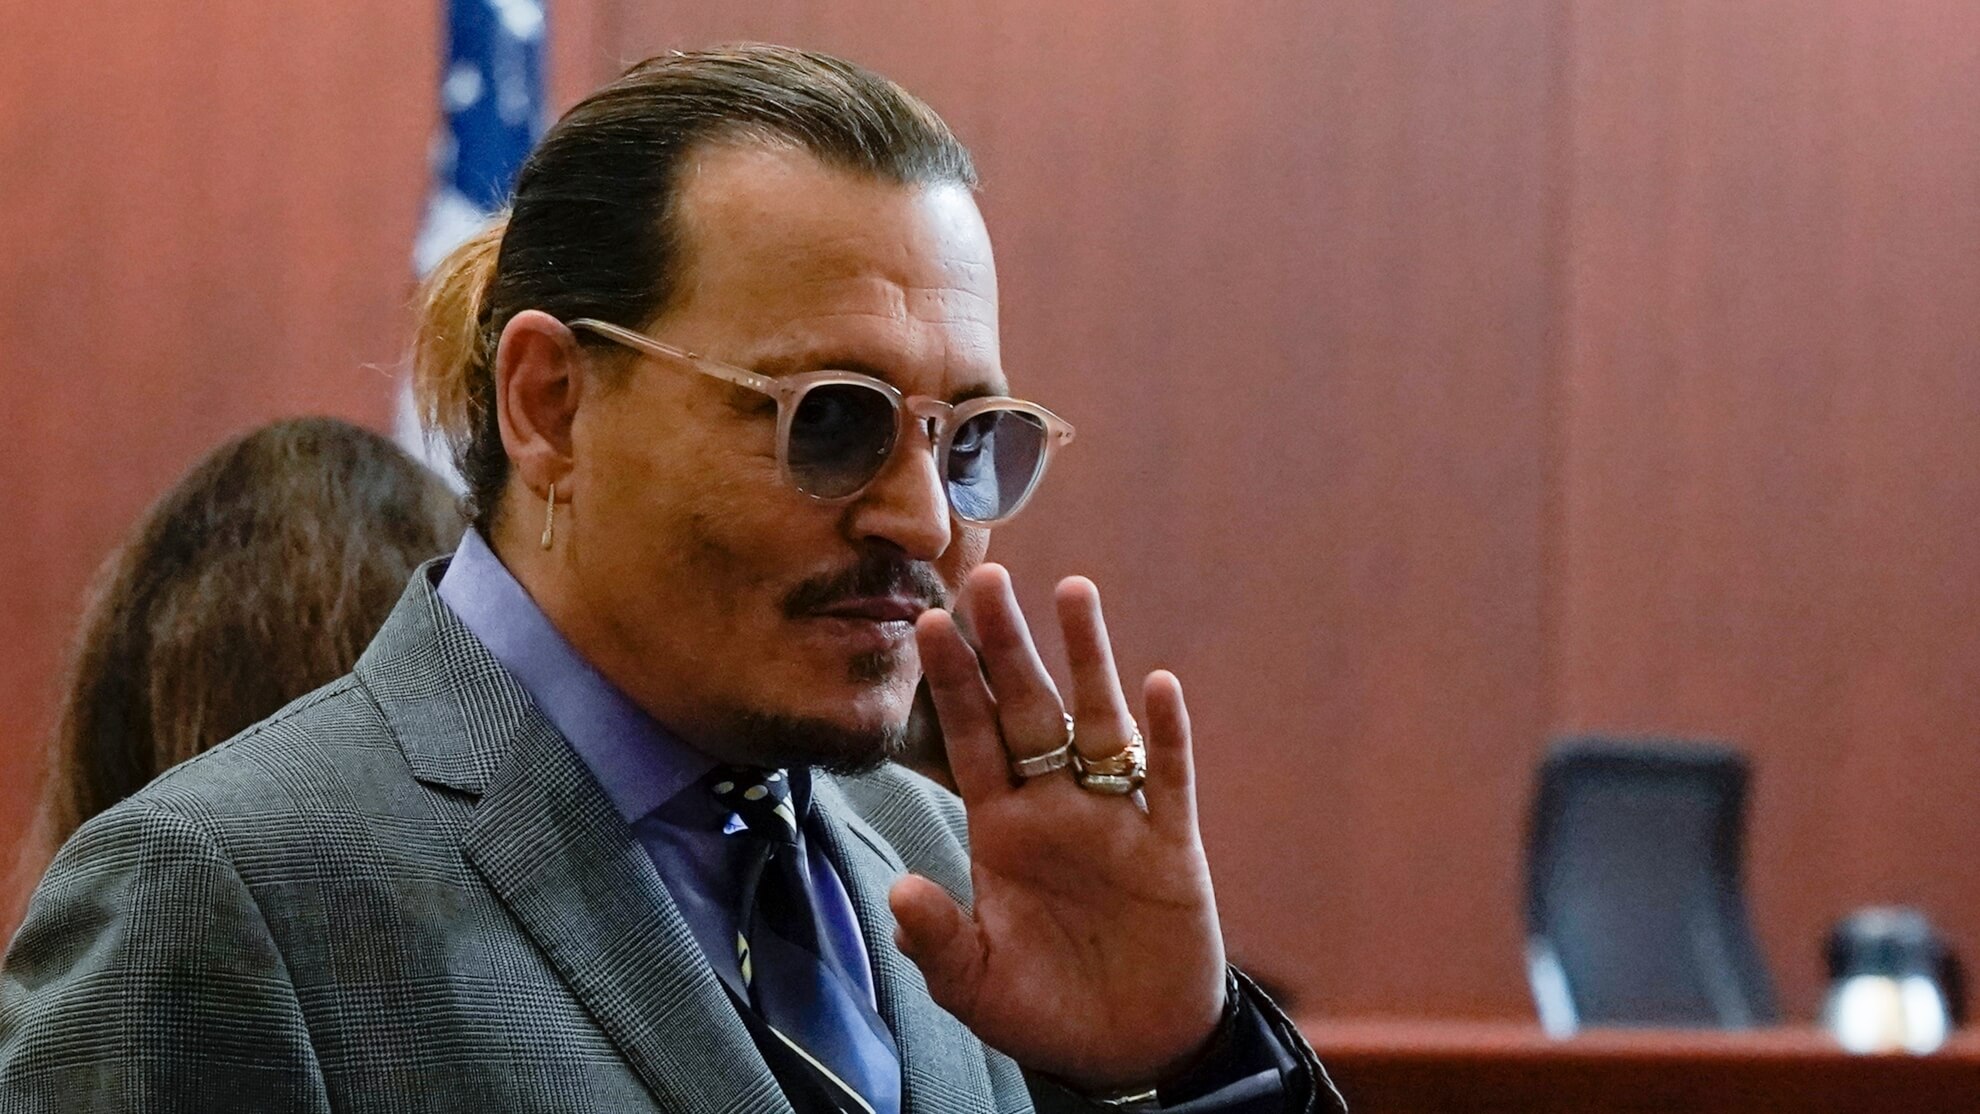 Johnny Depp's trial may bounce back actor's career